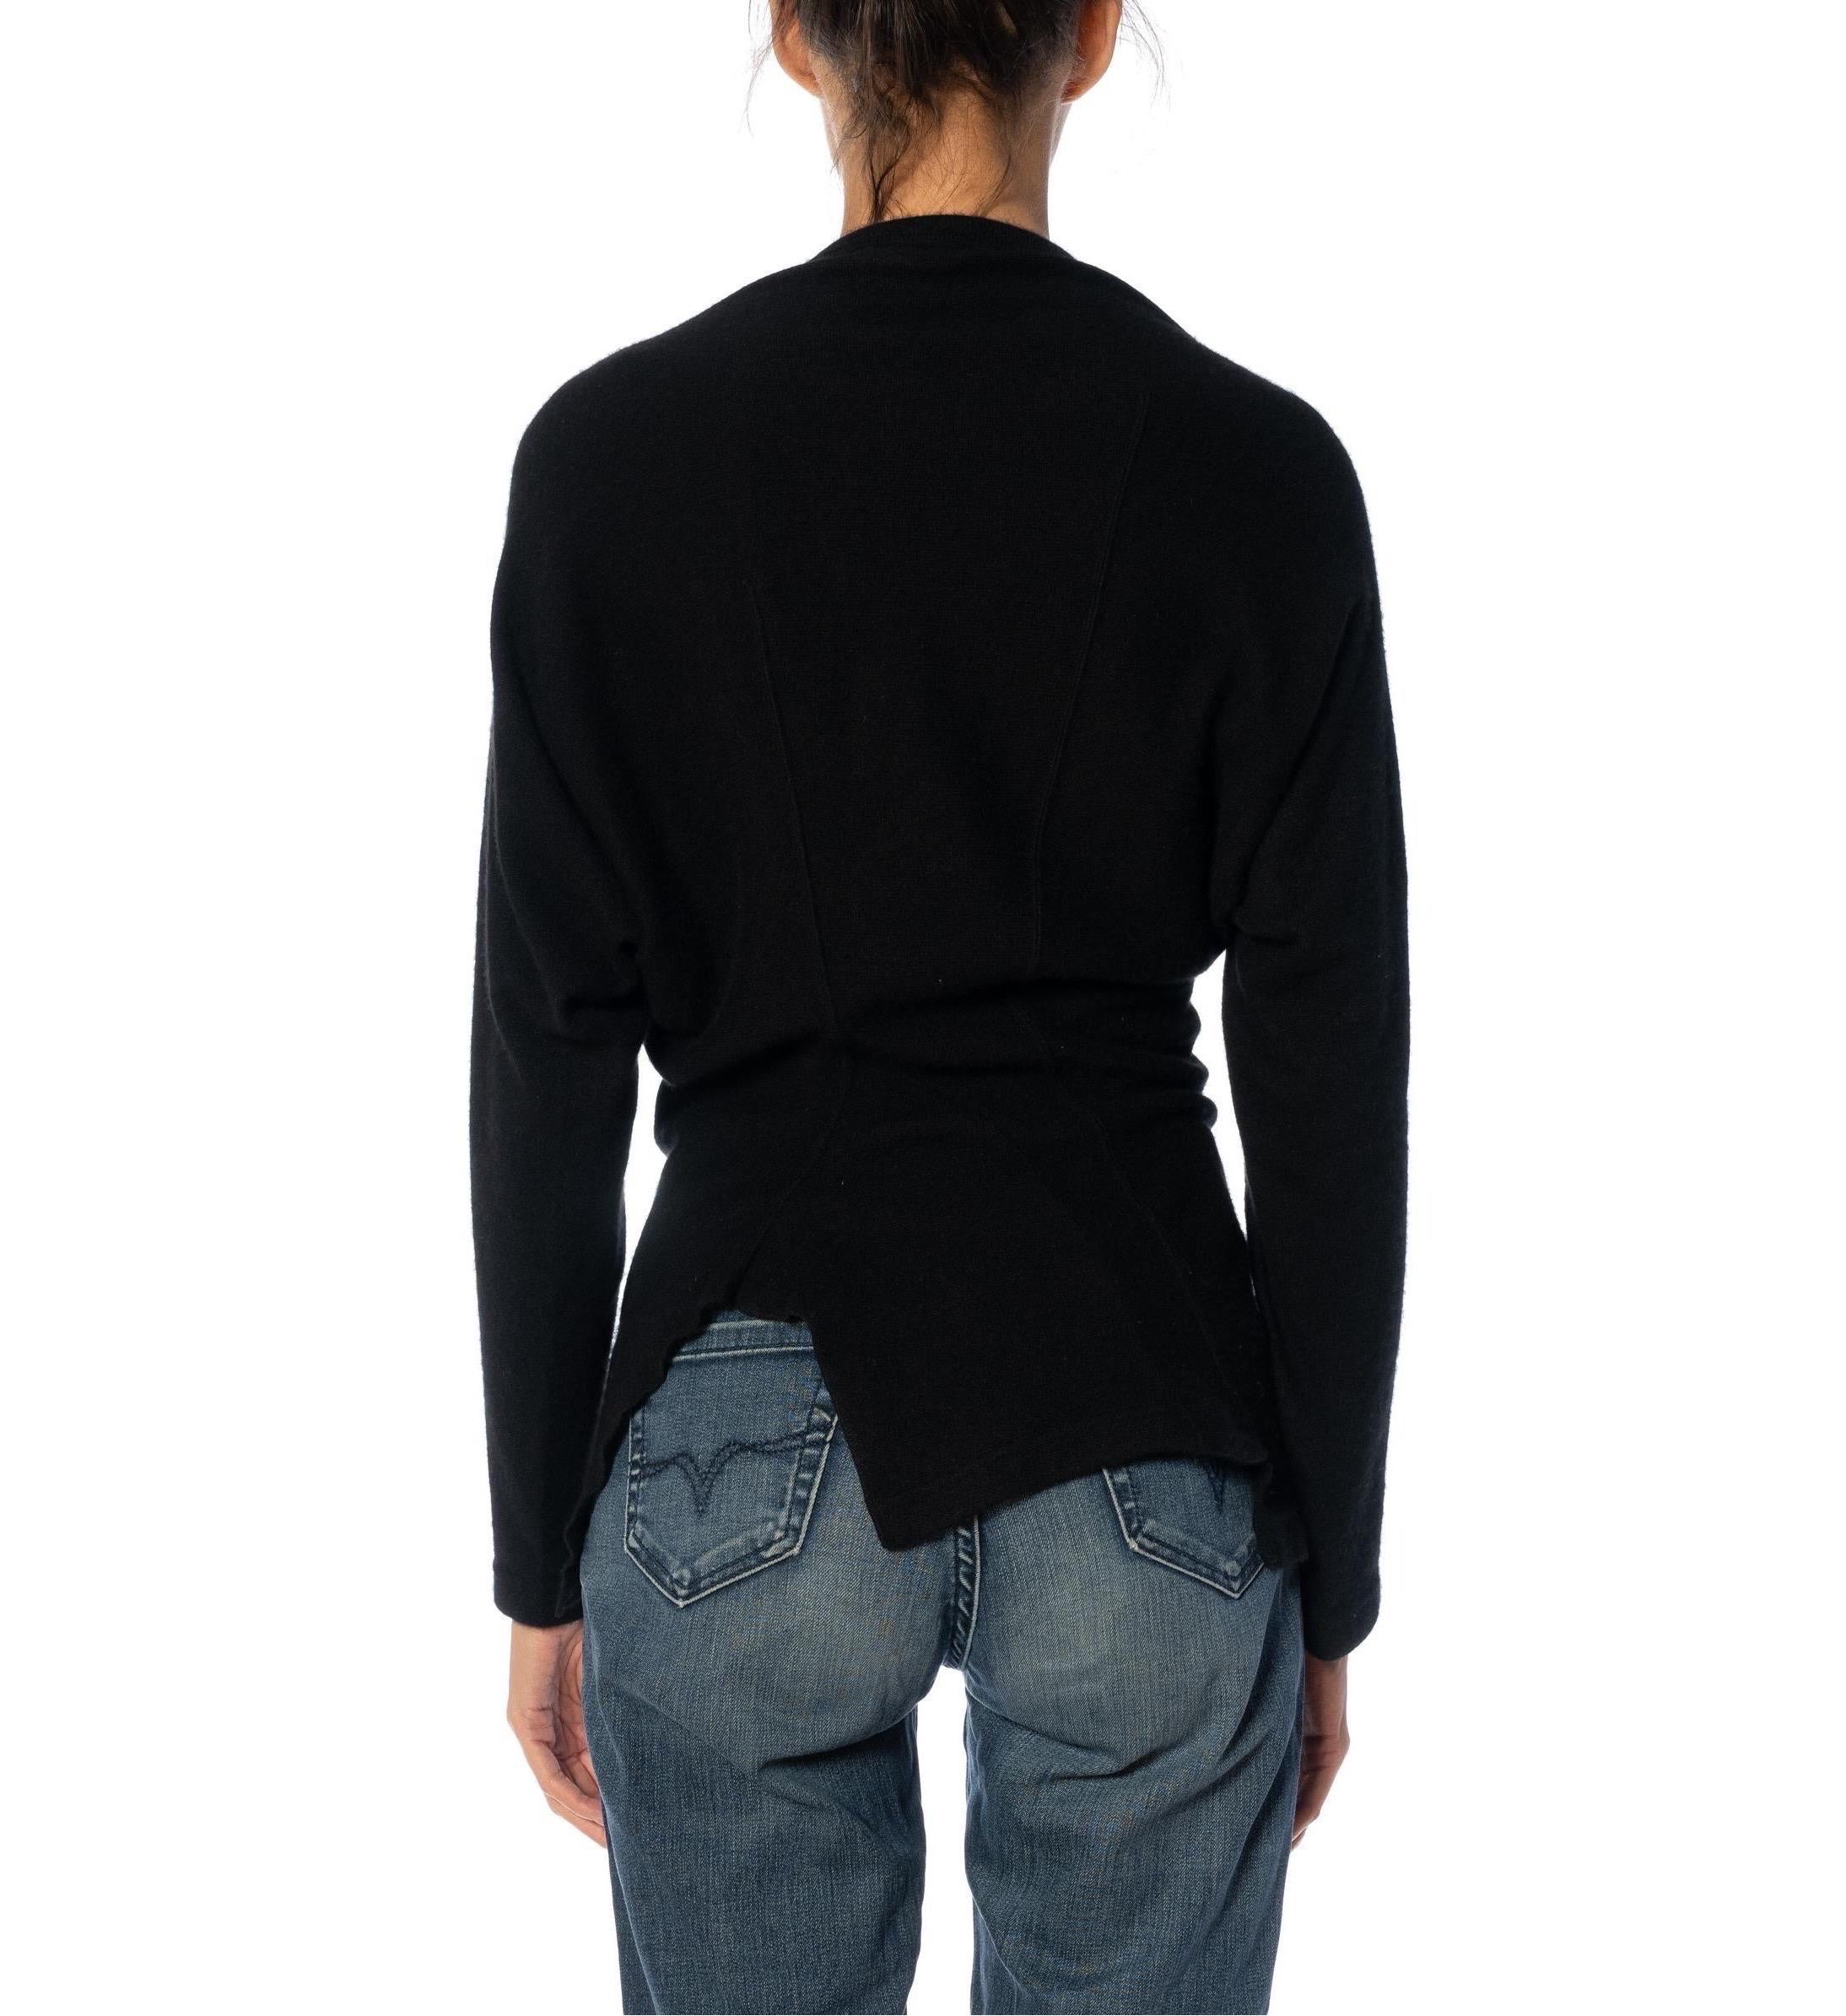 2000S COMME DES GARCONS Black Cashmere Asymmetrically Seamed Sweater 2004 For Sale 5